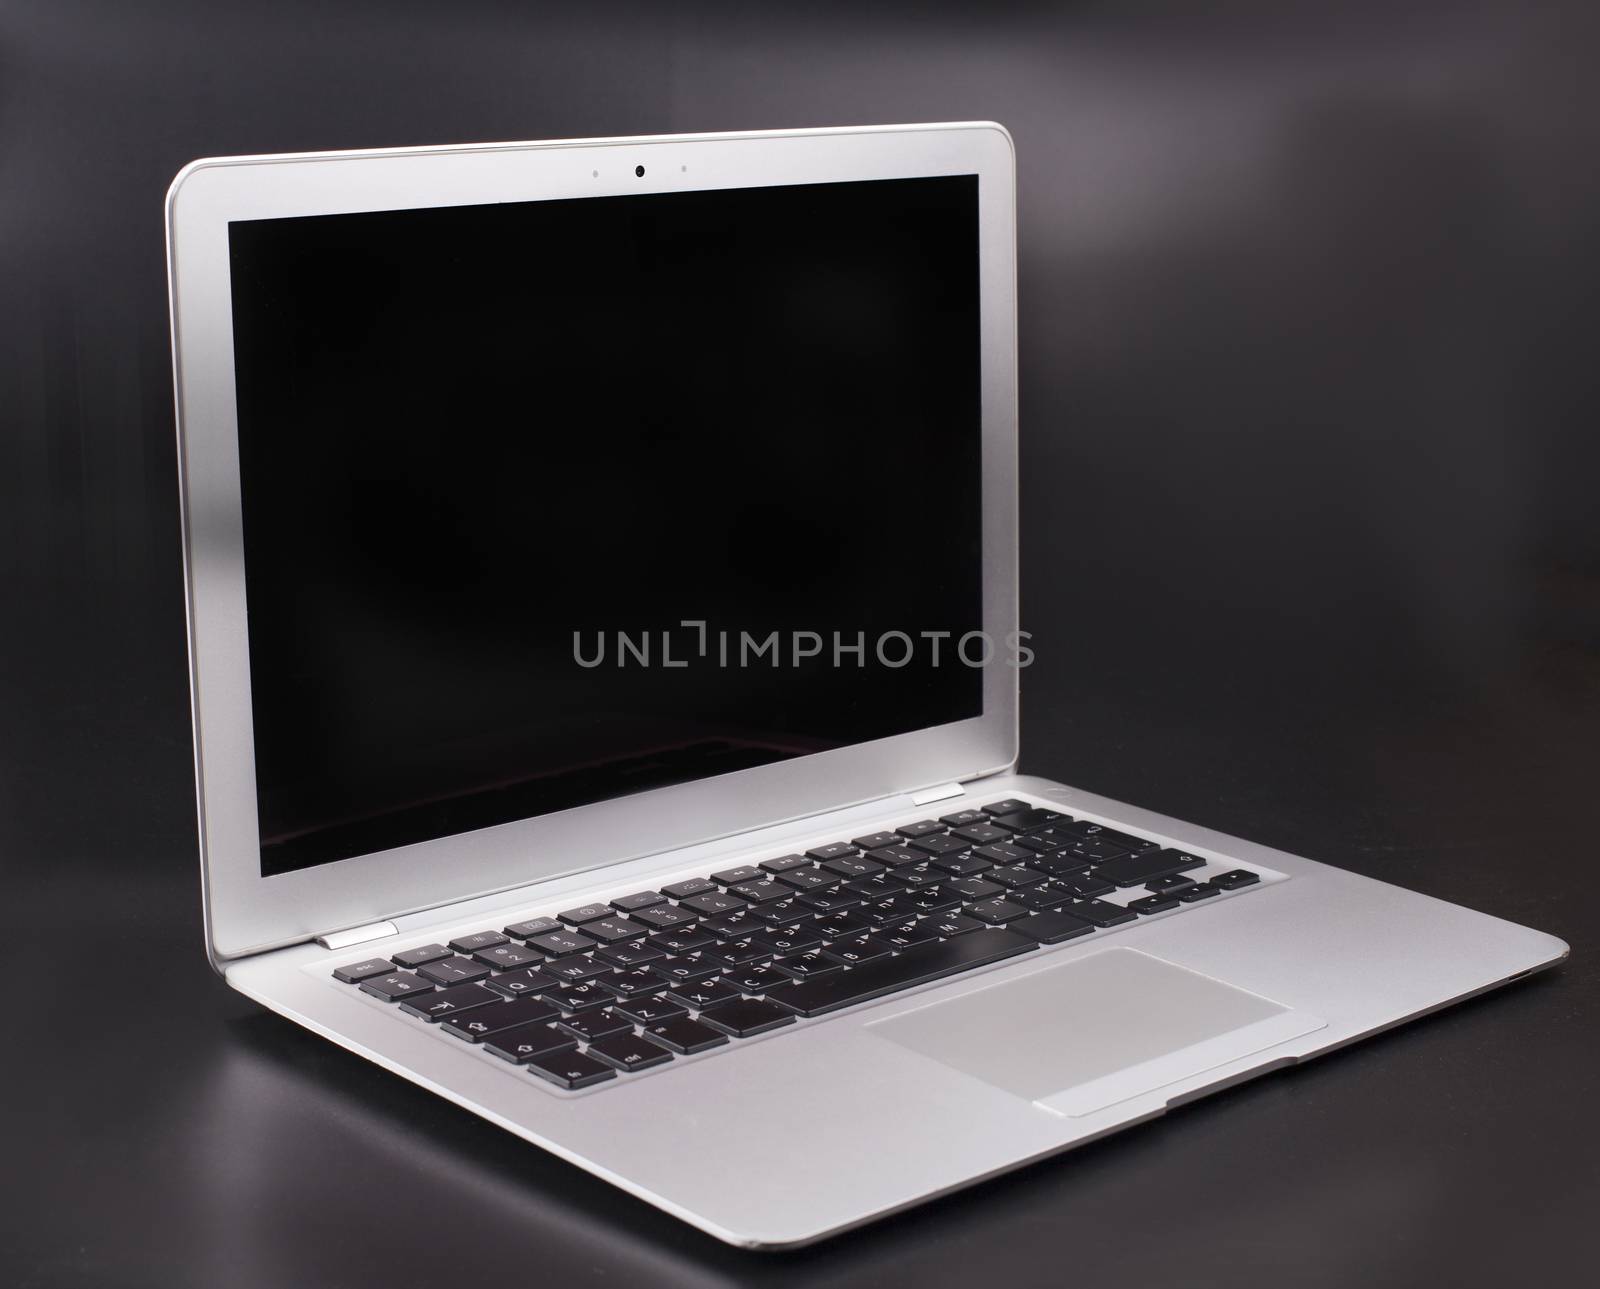 Slim silver color laptop on a dark background with black blank screen